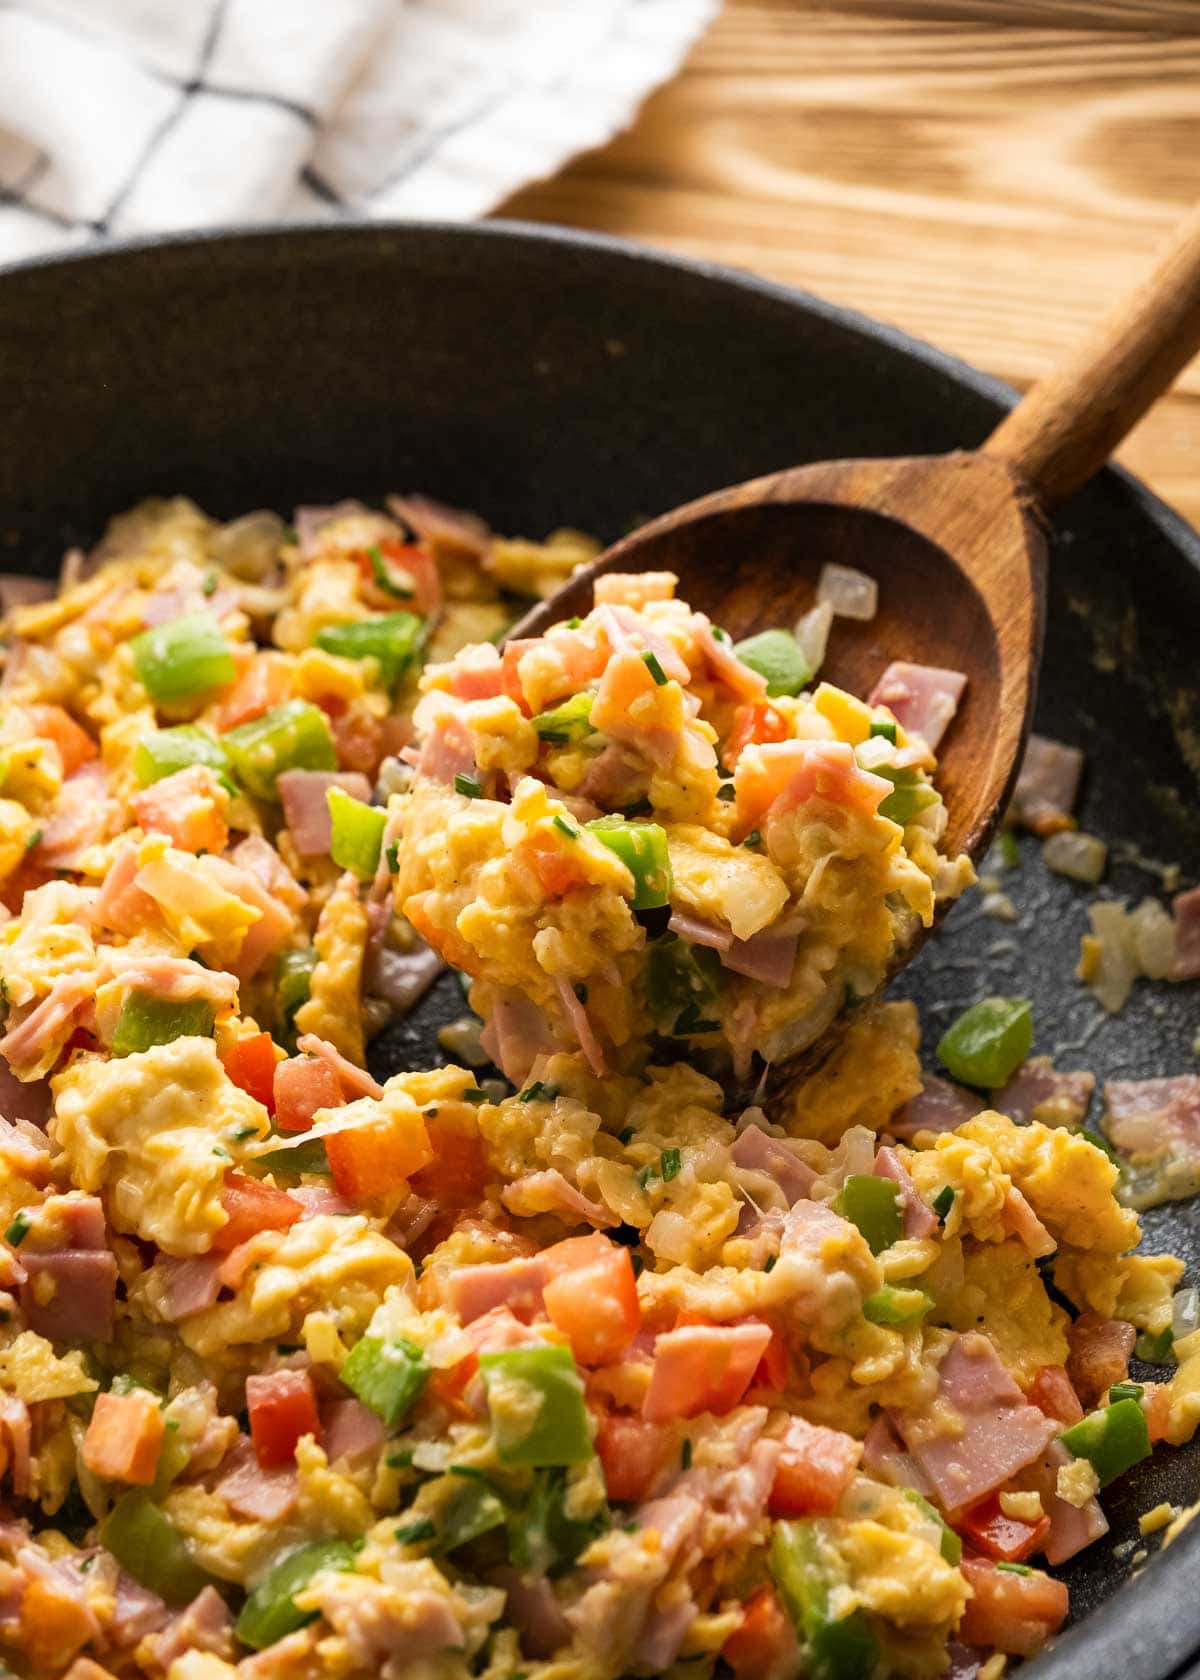 scrambled eggs with ham and vegetables in a skillet with a wooden spoon